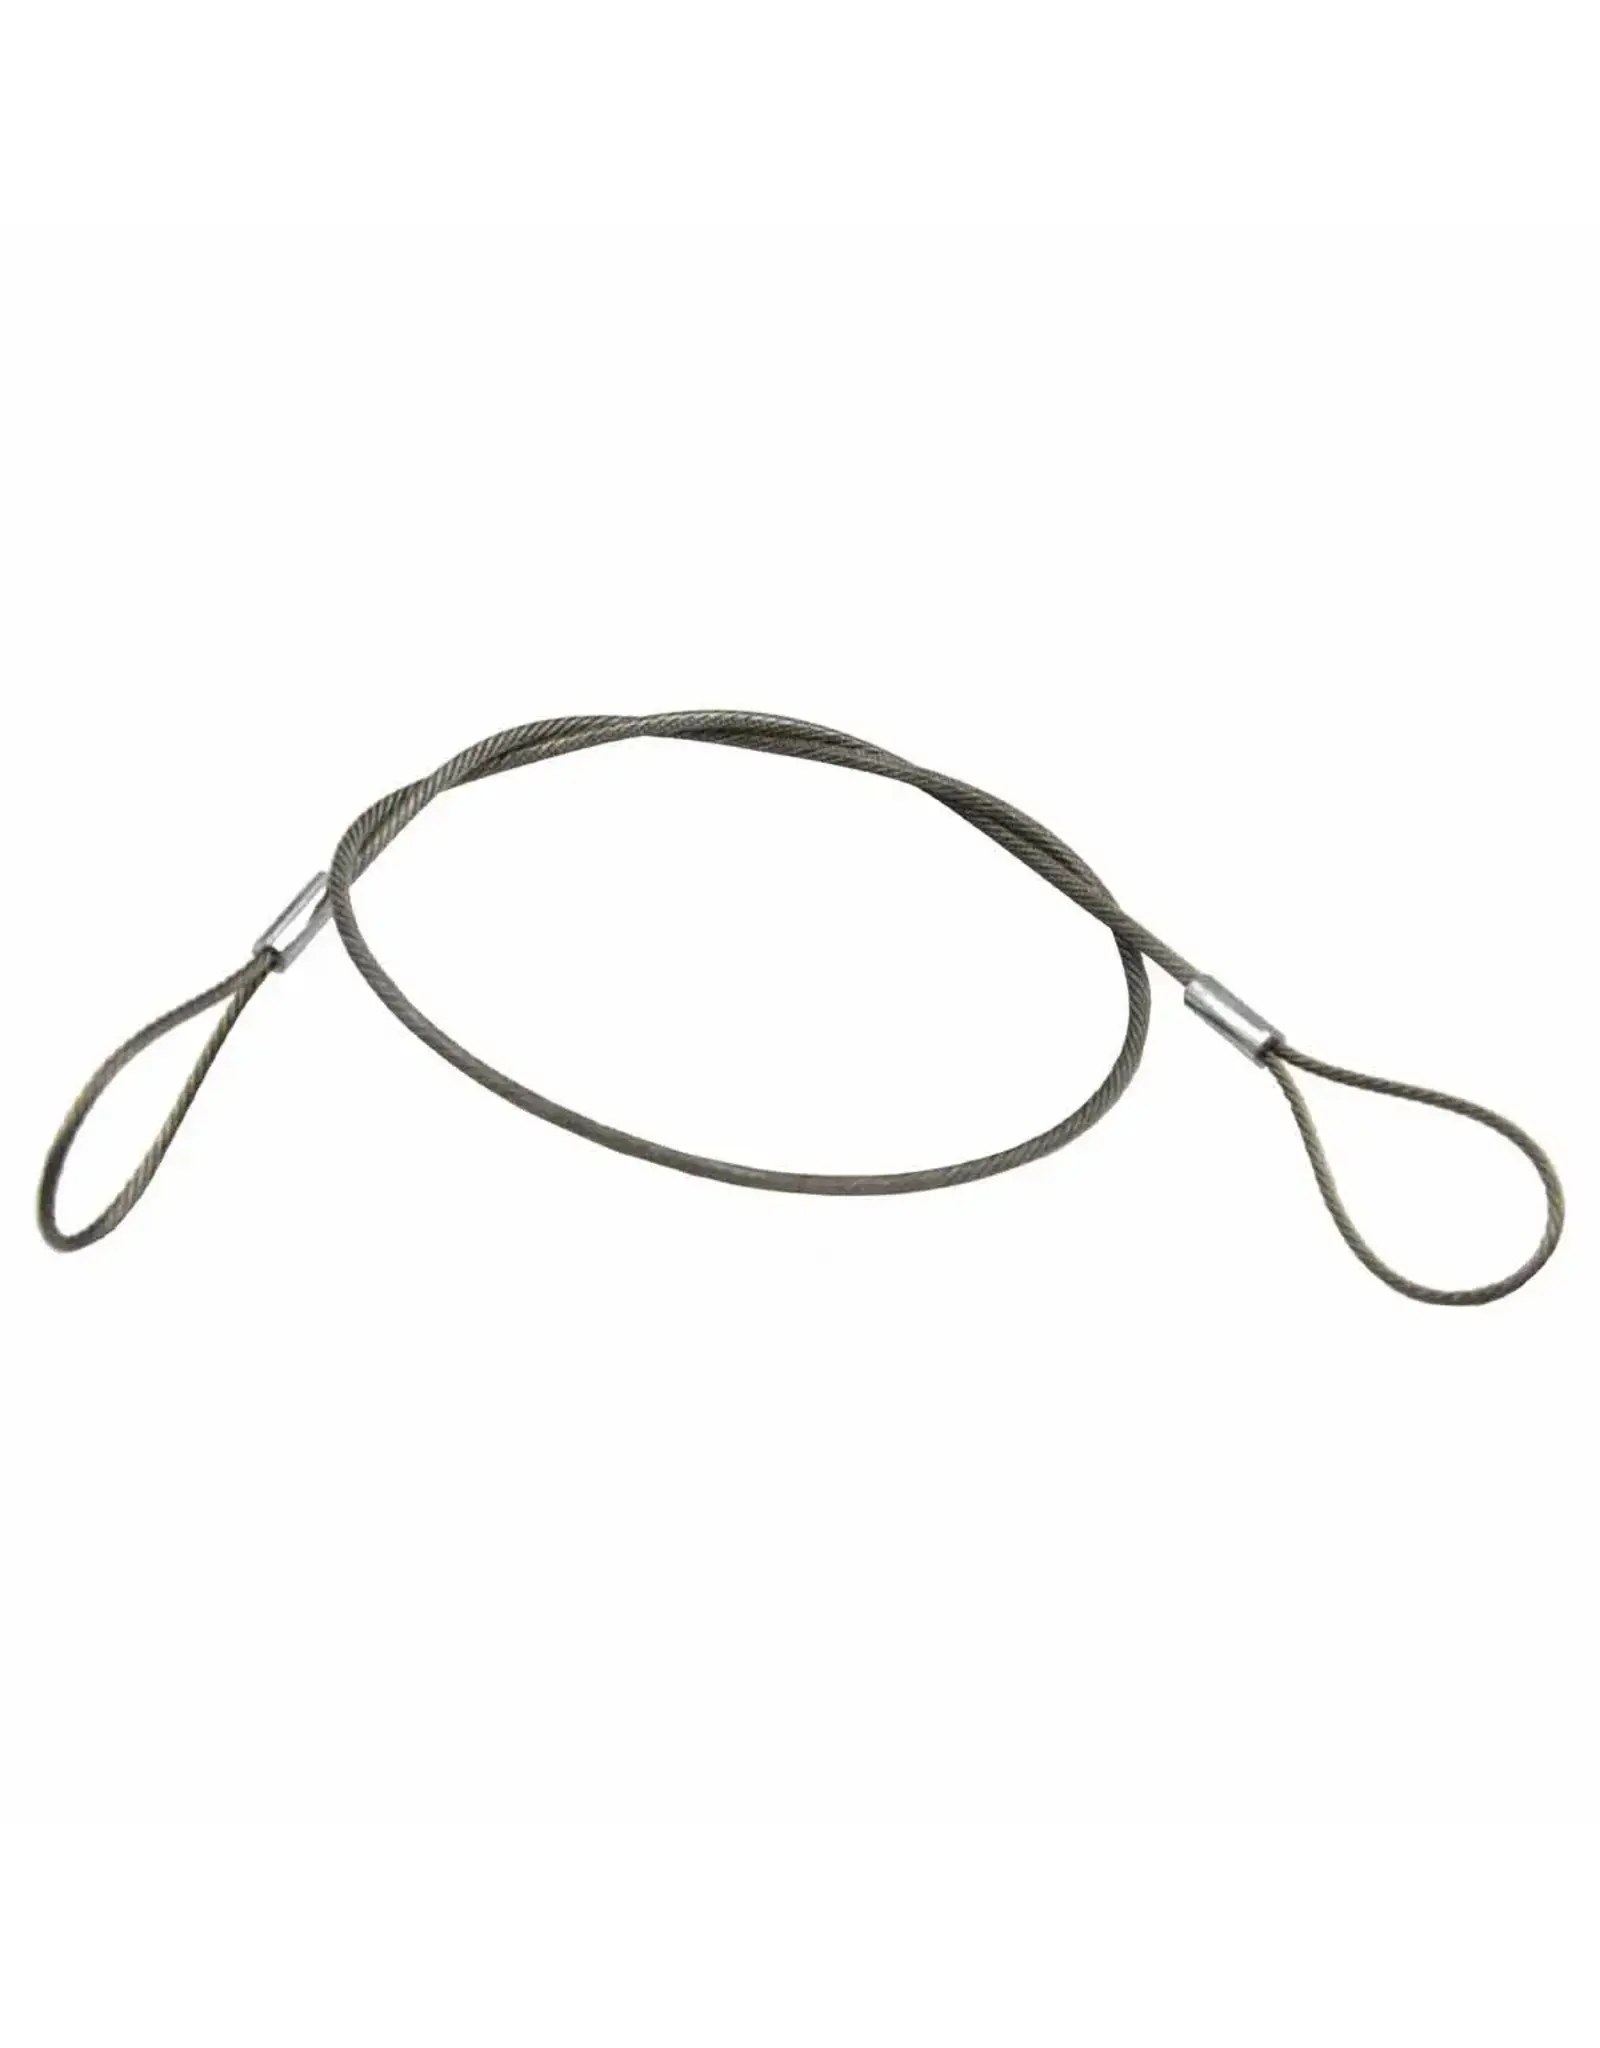 Steambow Stringing Aid